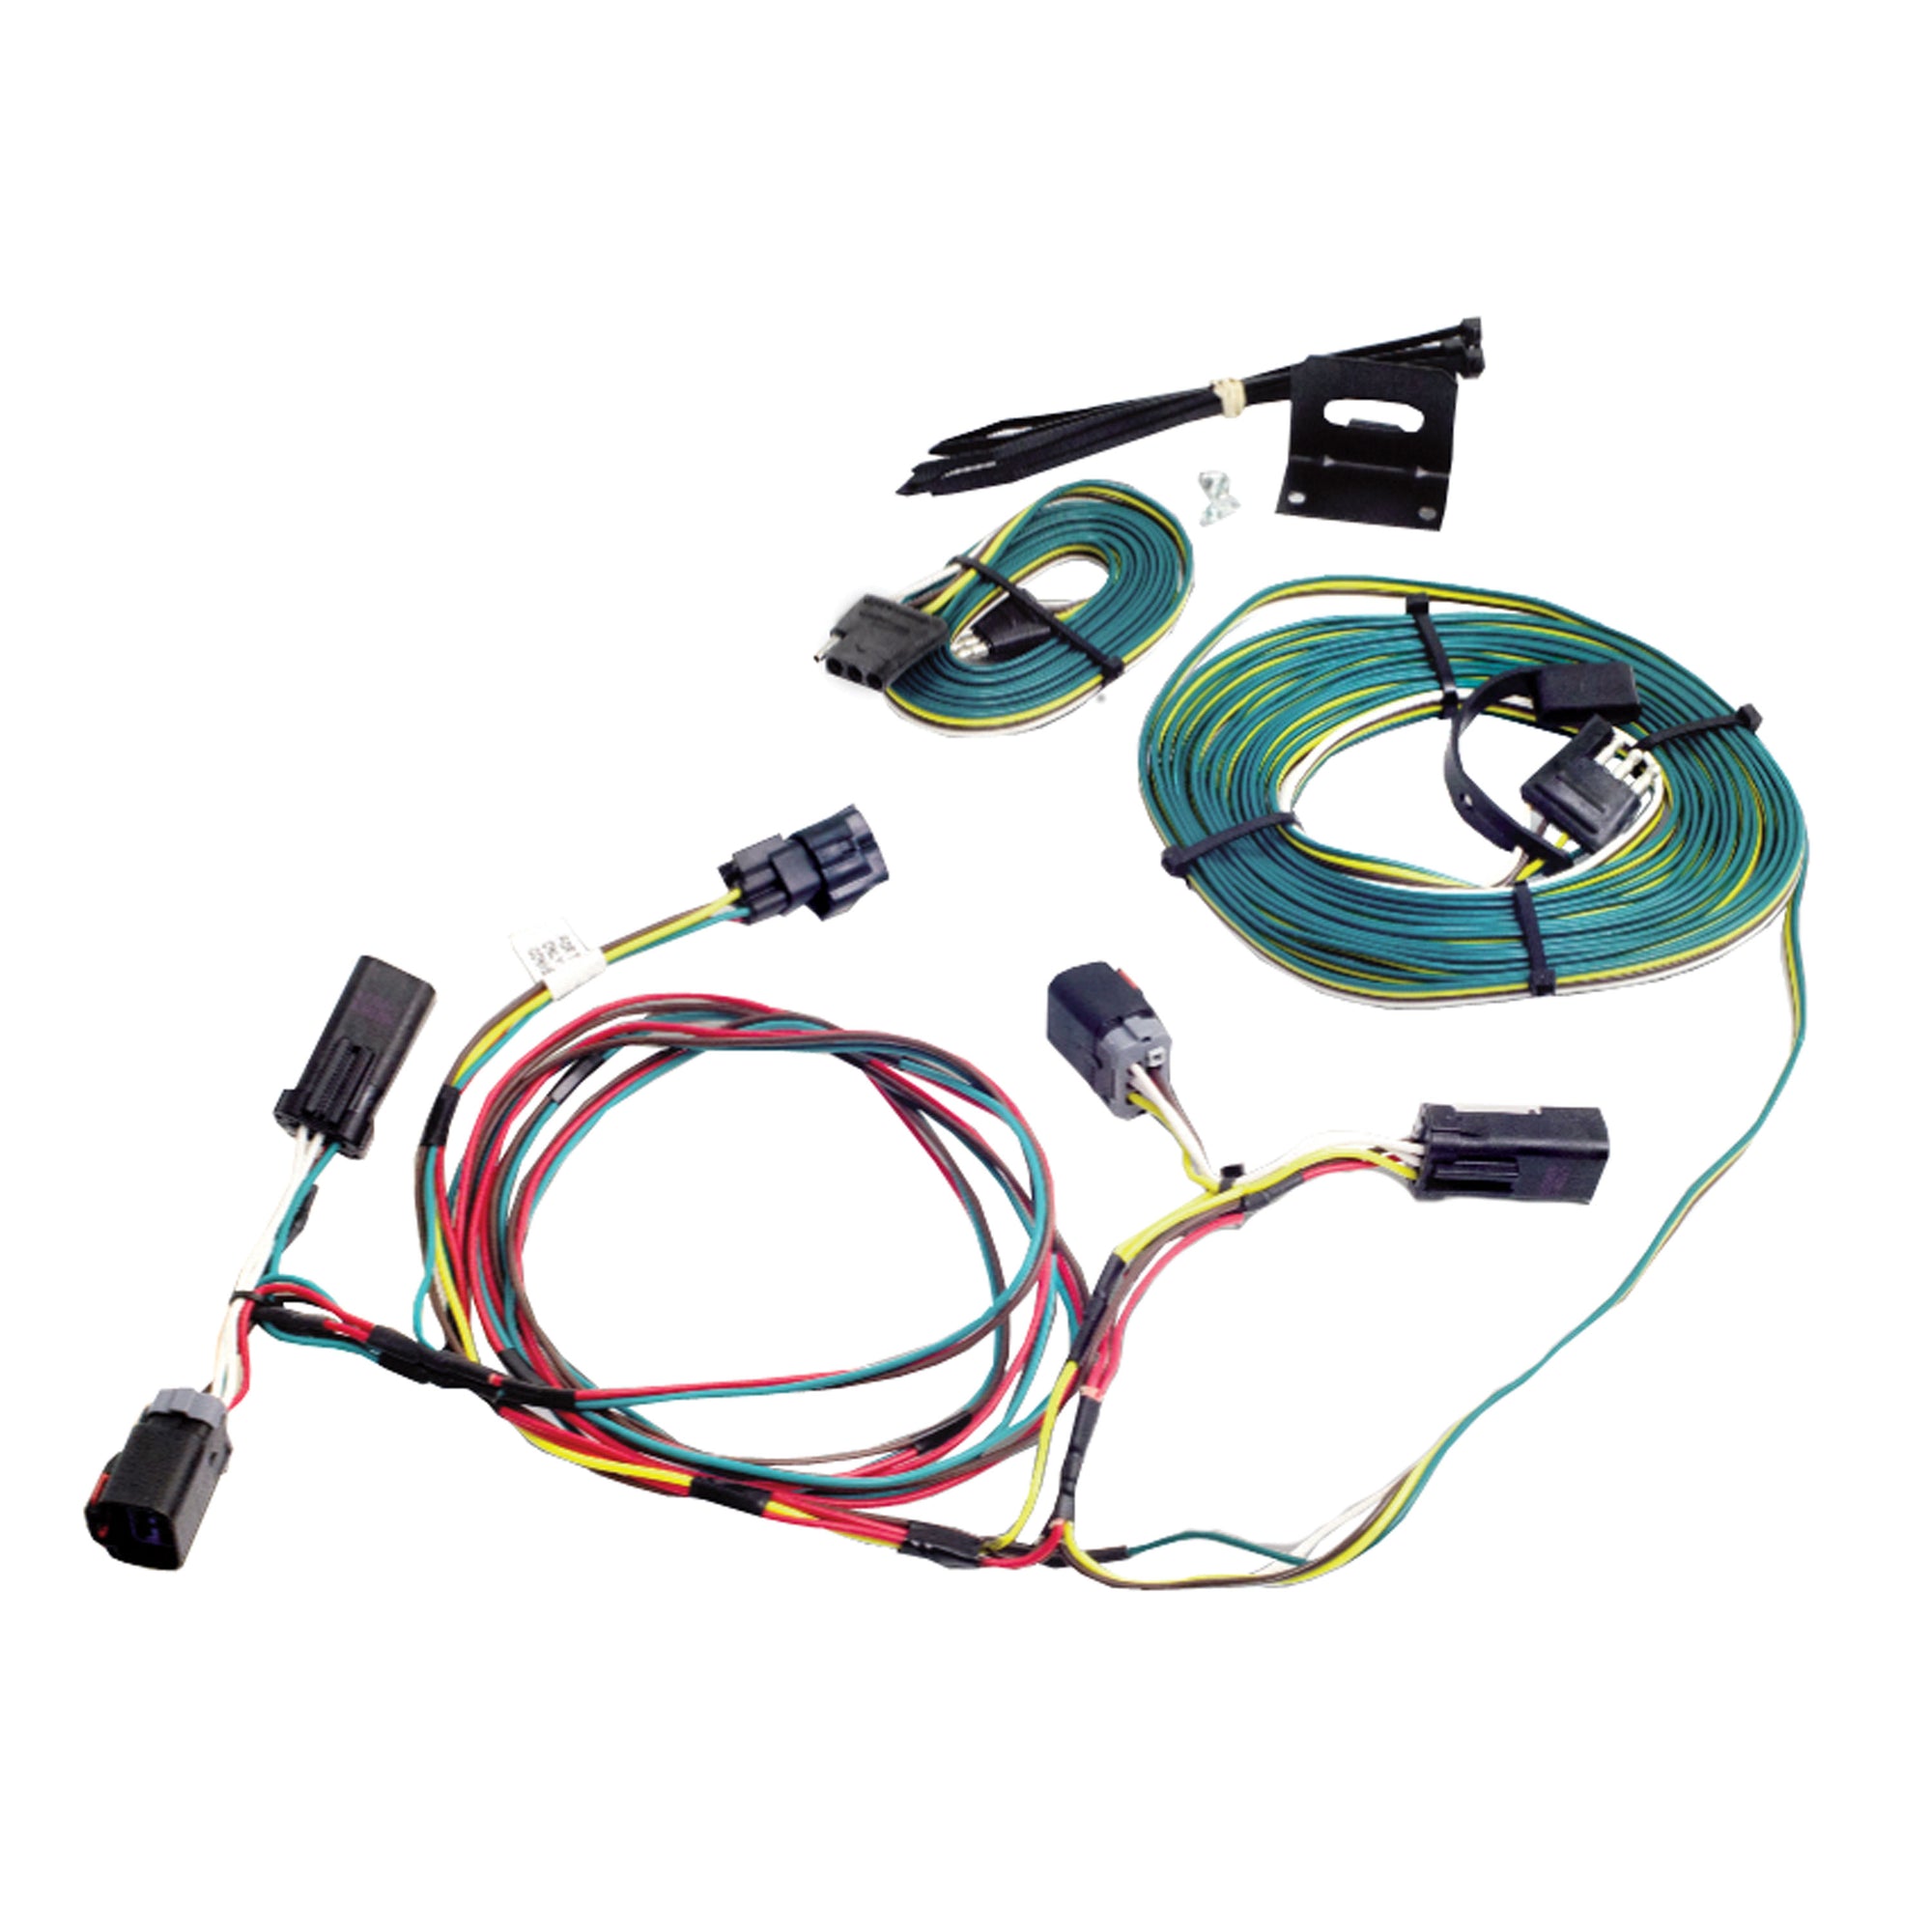 Demco 9523084 Towed Connector Vehicle Wiring Kit - For Honda CRV '02-'06